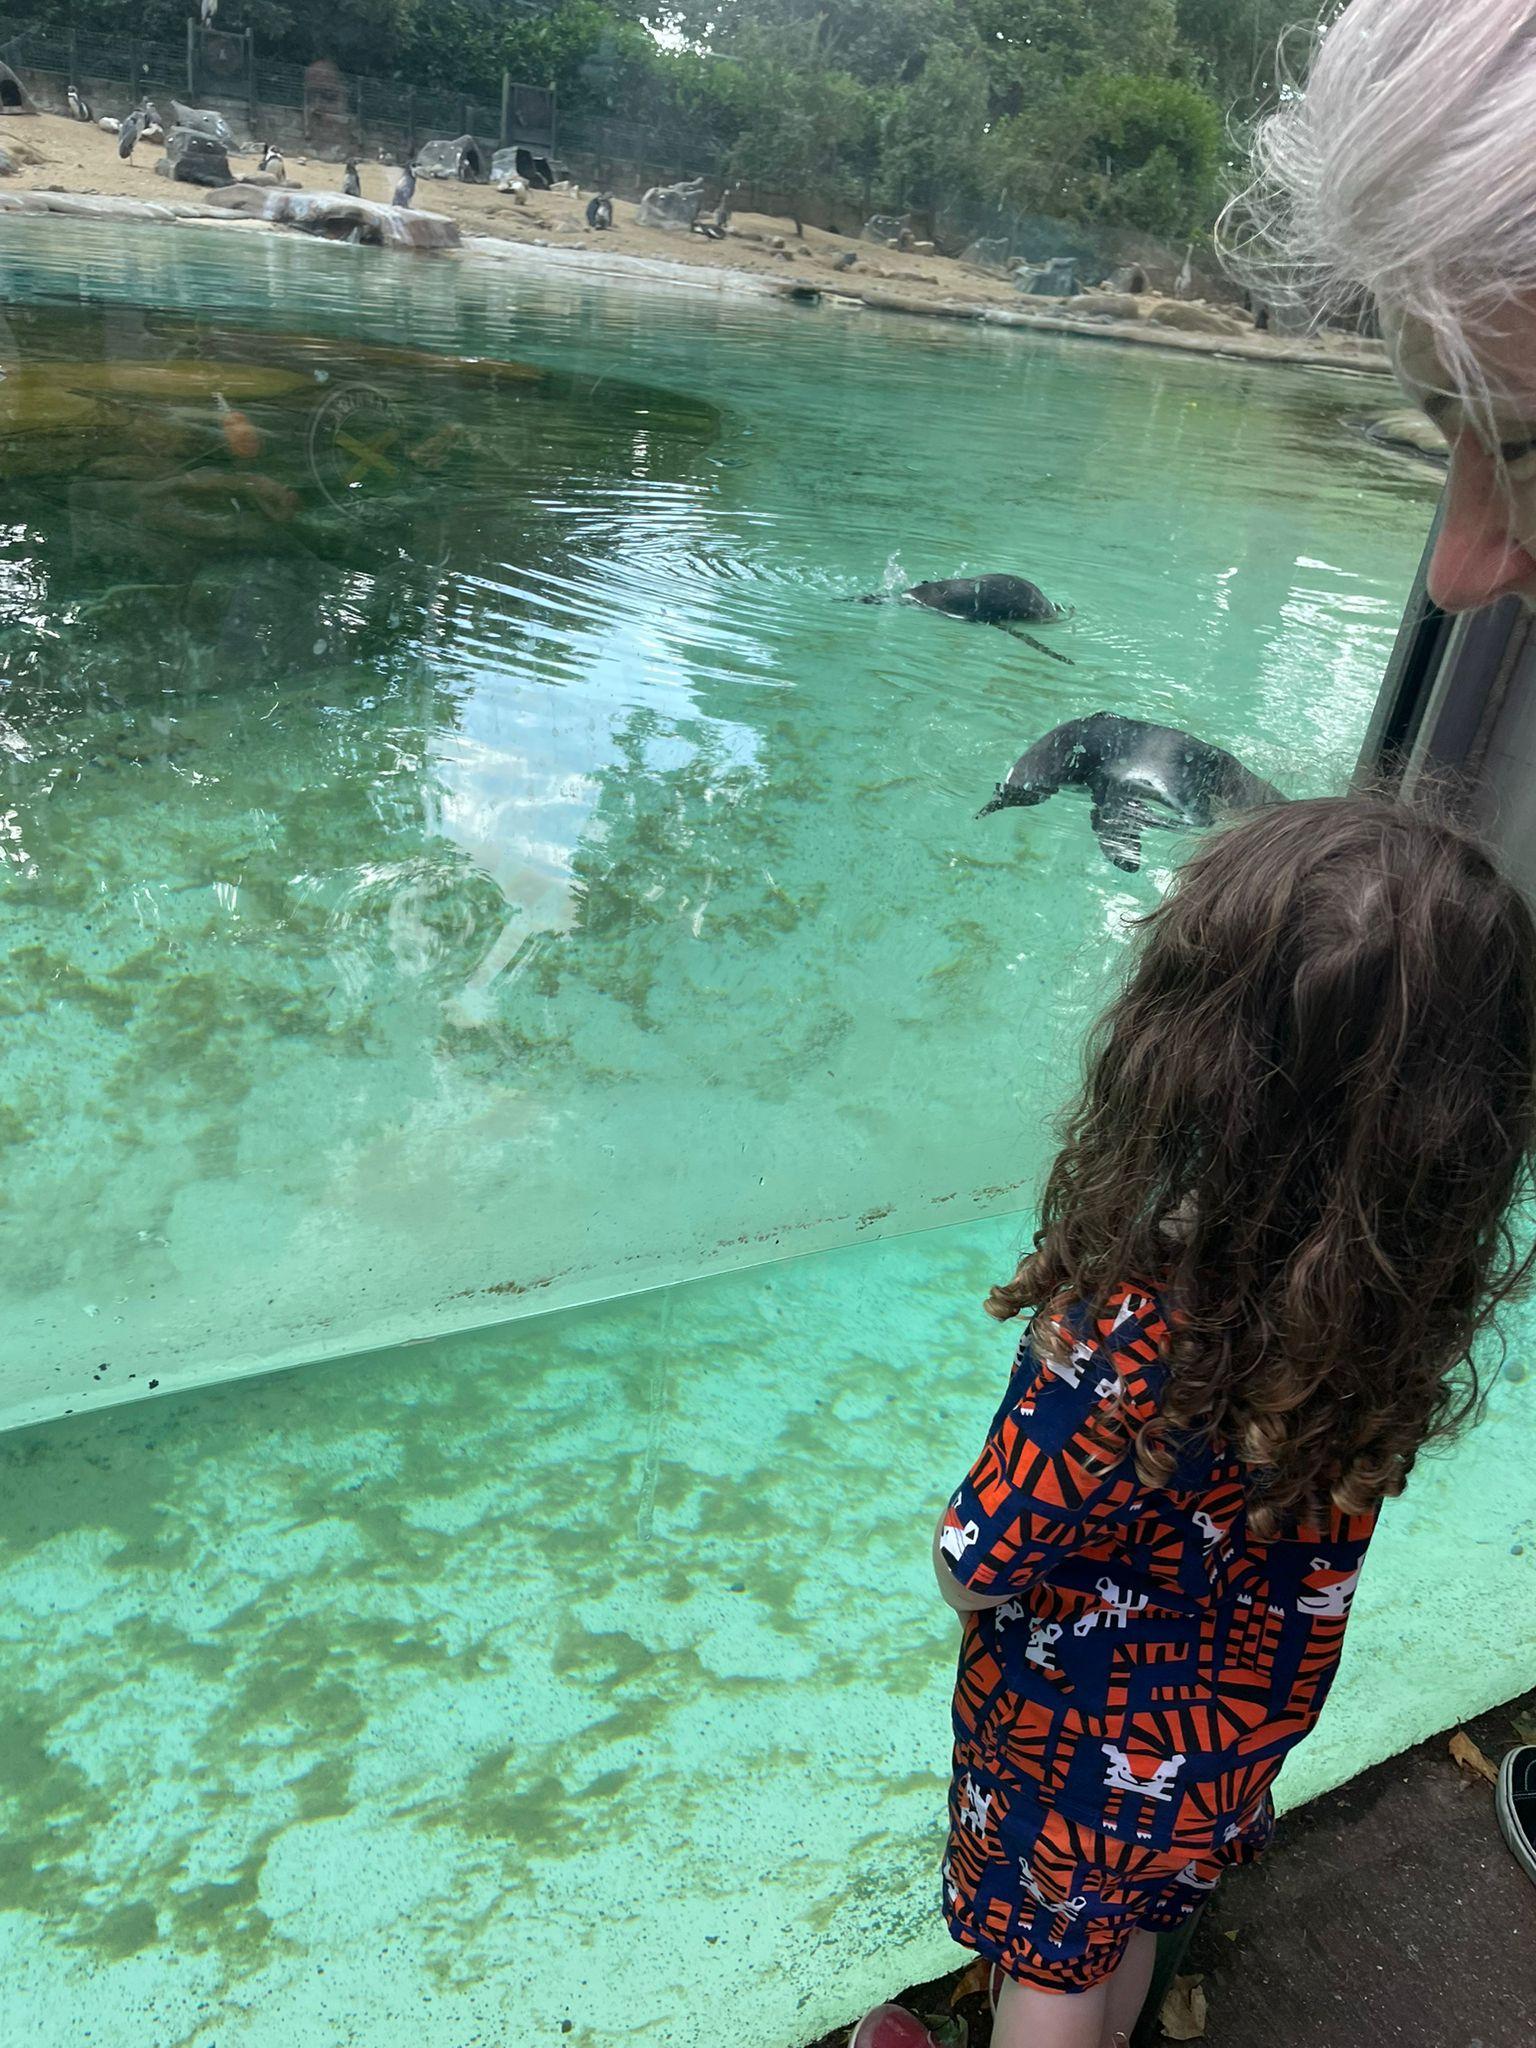 The pic is of a young child watching the penguins relaxing and swimming in their pen at London Zoo.